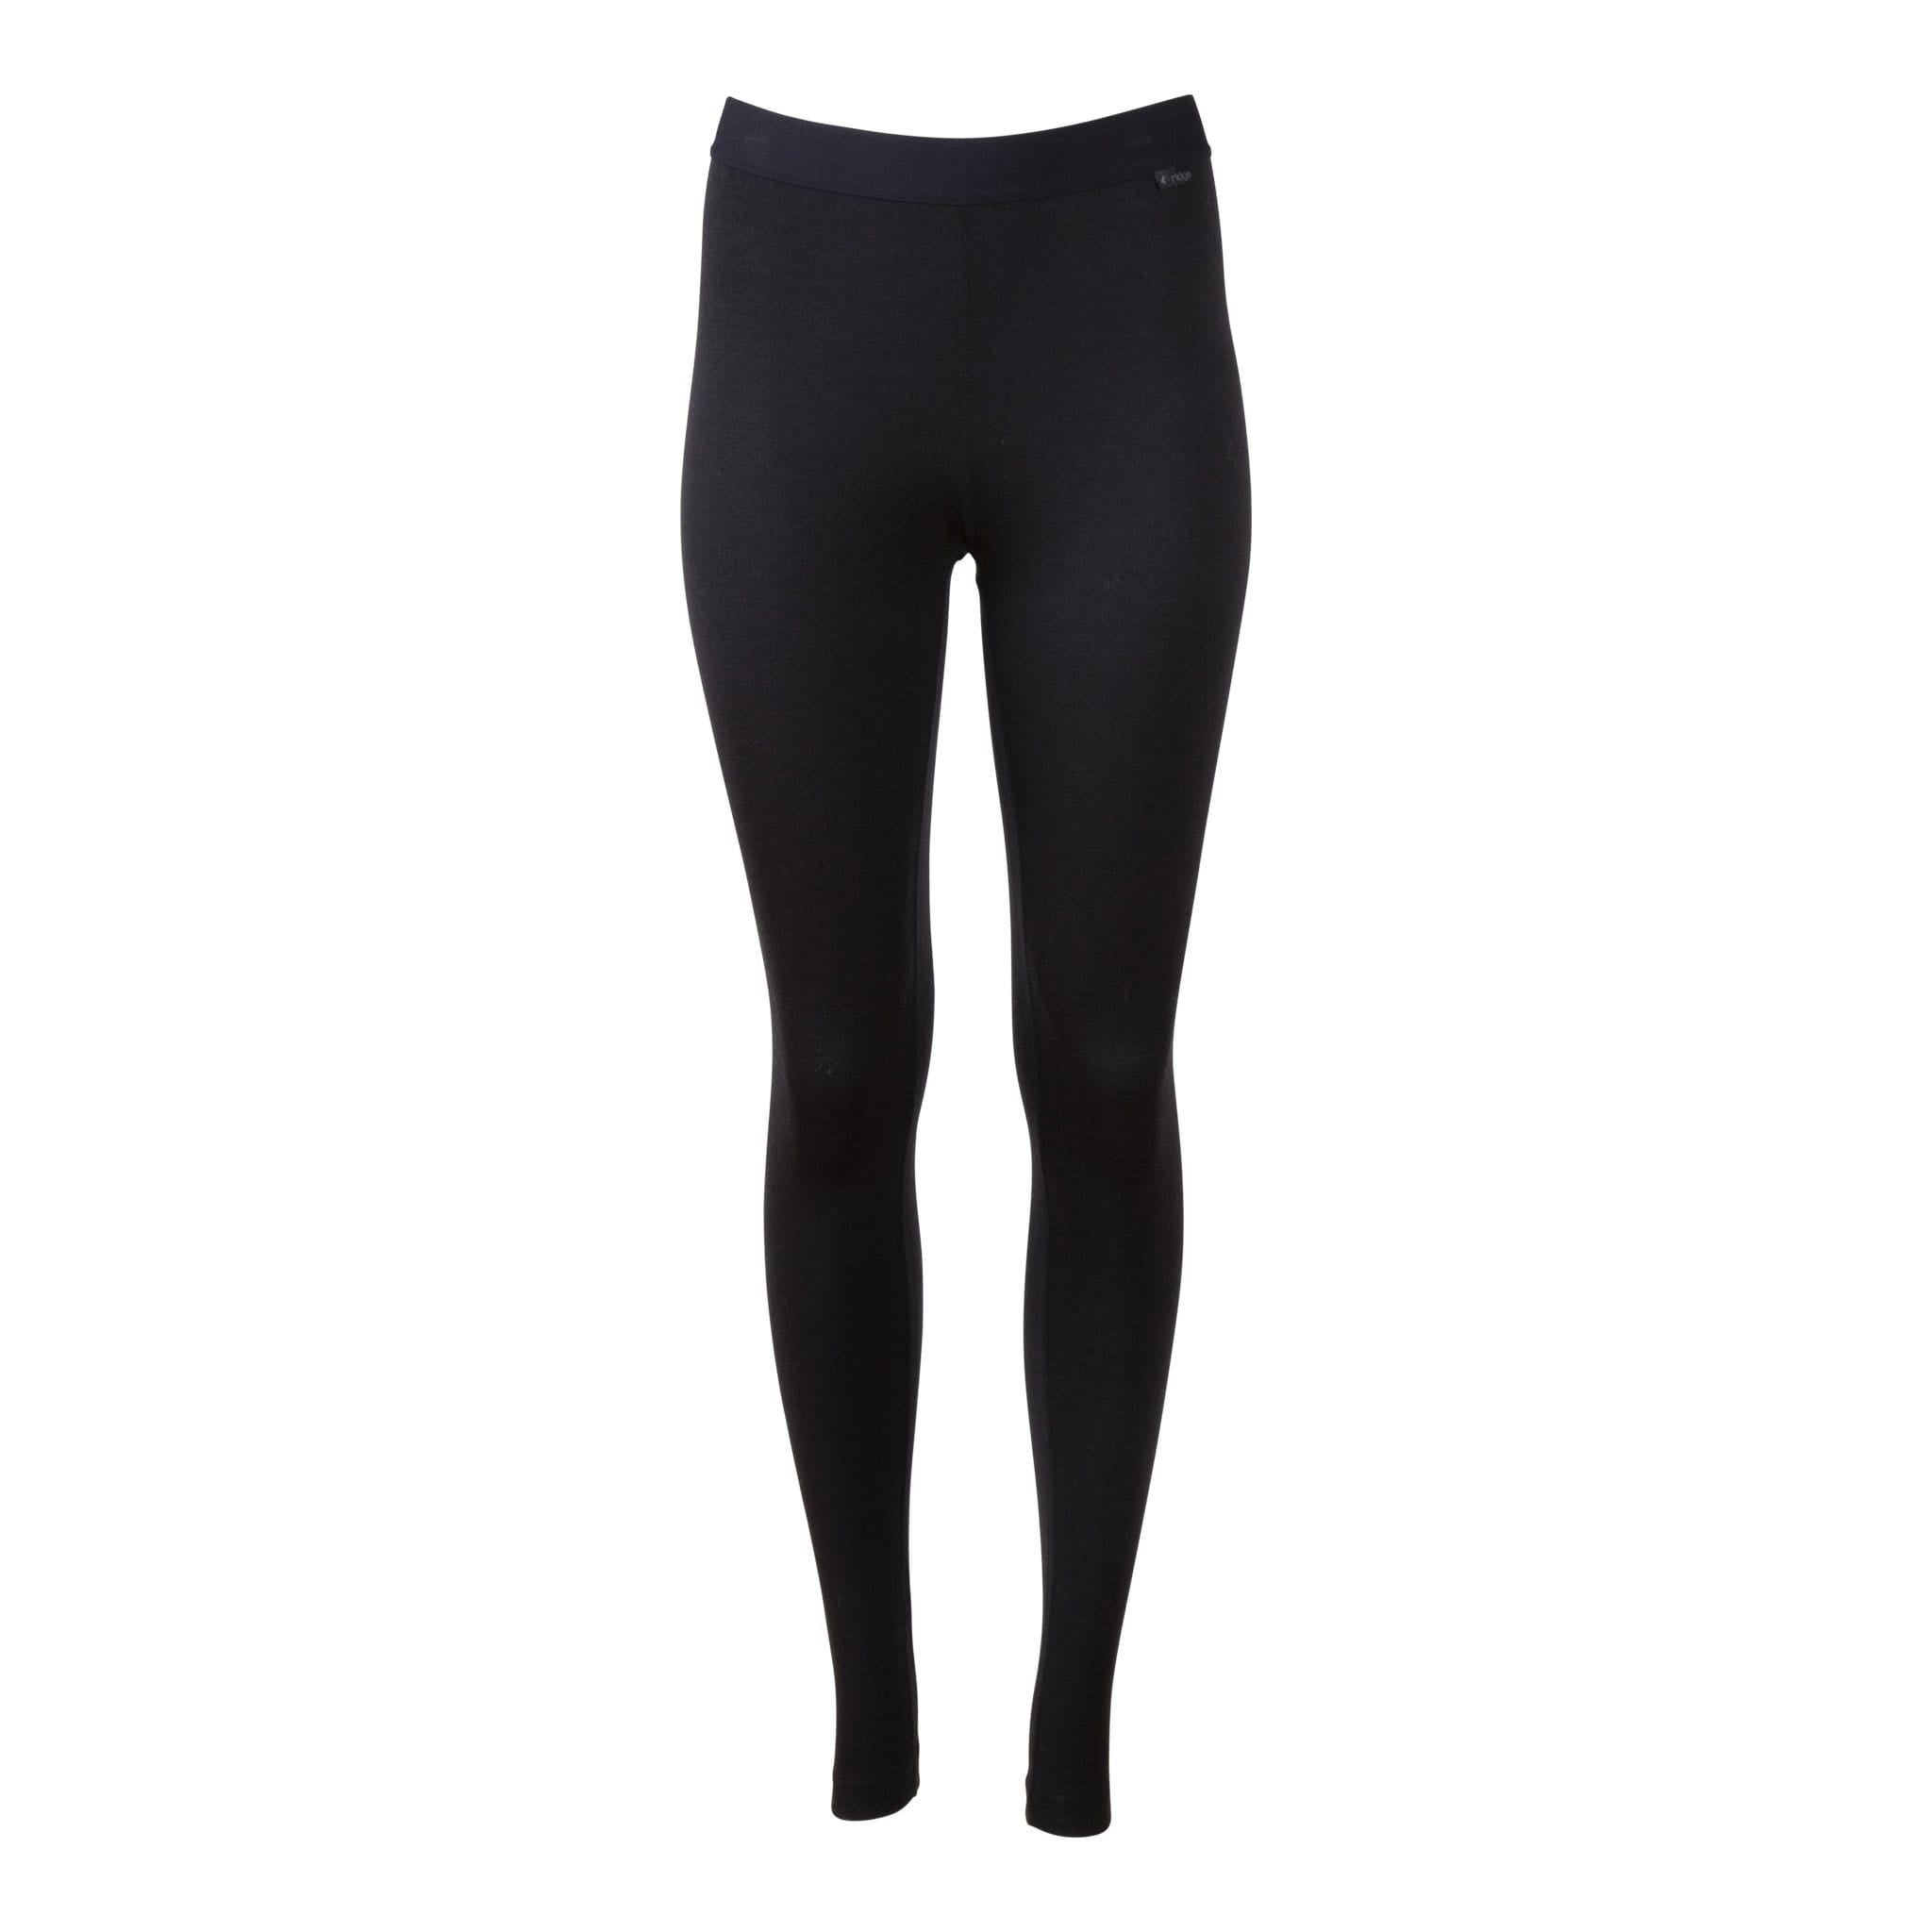 Woolx Womens Avery Midweight Merino Wool Base Layer Leggings for Warmth  Black SM for sale online